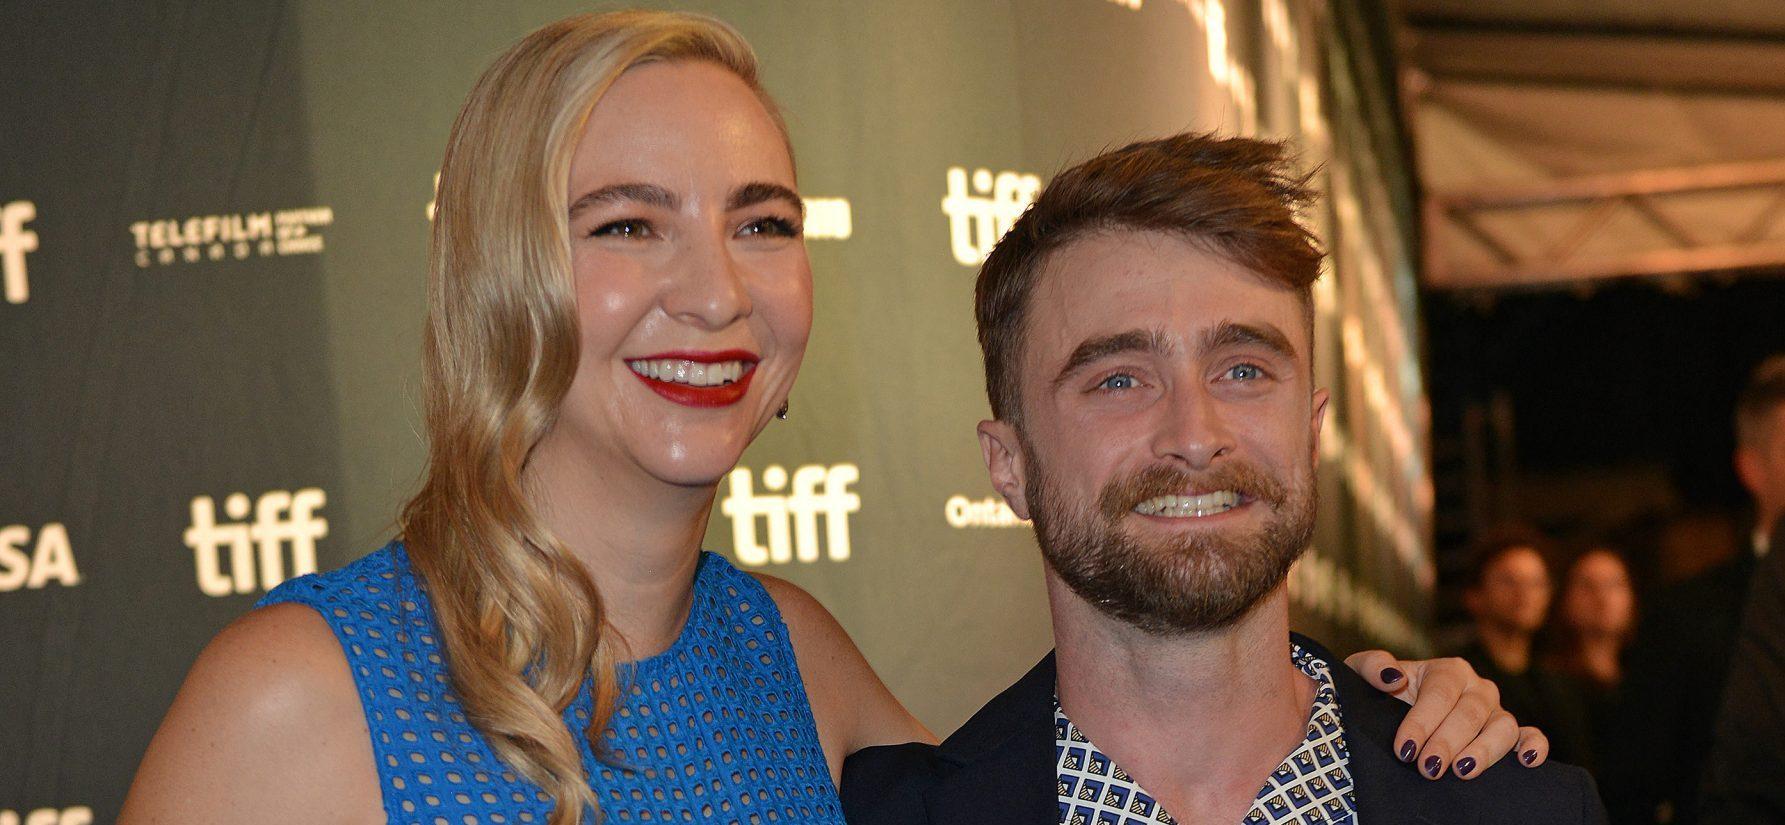 ‘Harry Potter’ Star Daniel Radcliffe Is Reportedly Expecting His 1st Child With Girlfriend Erin Darke